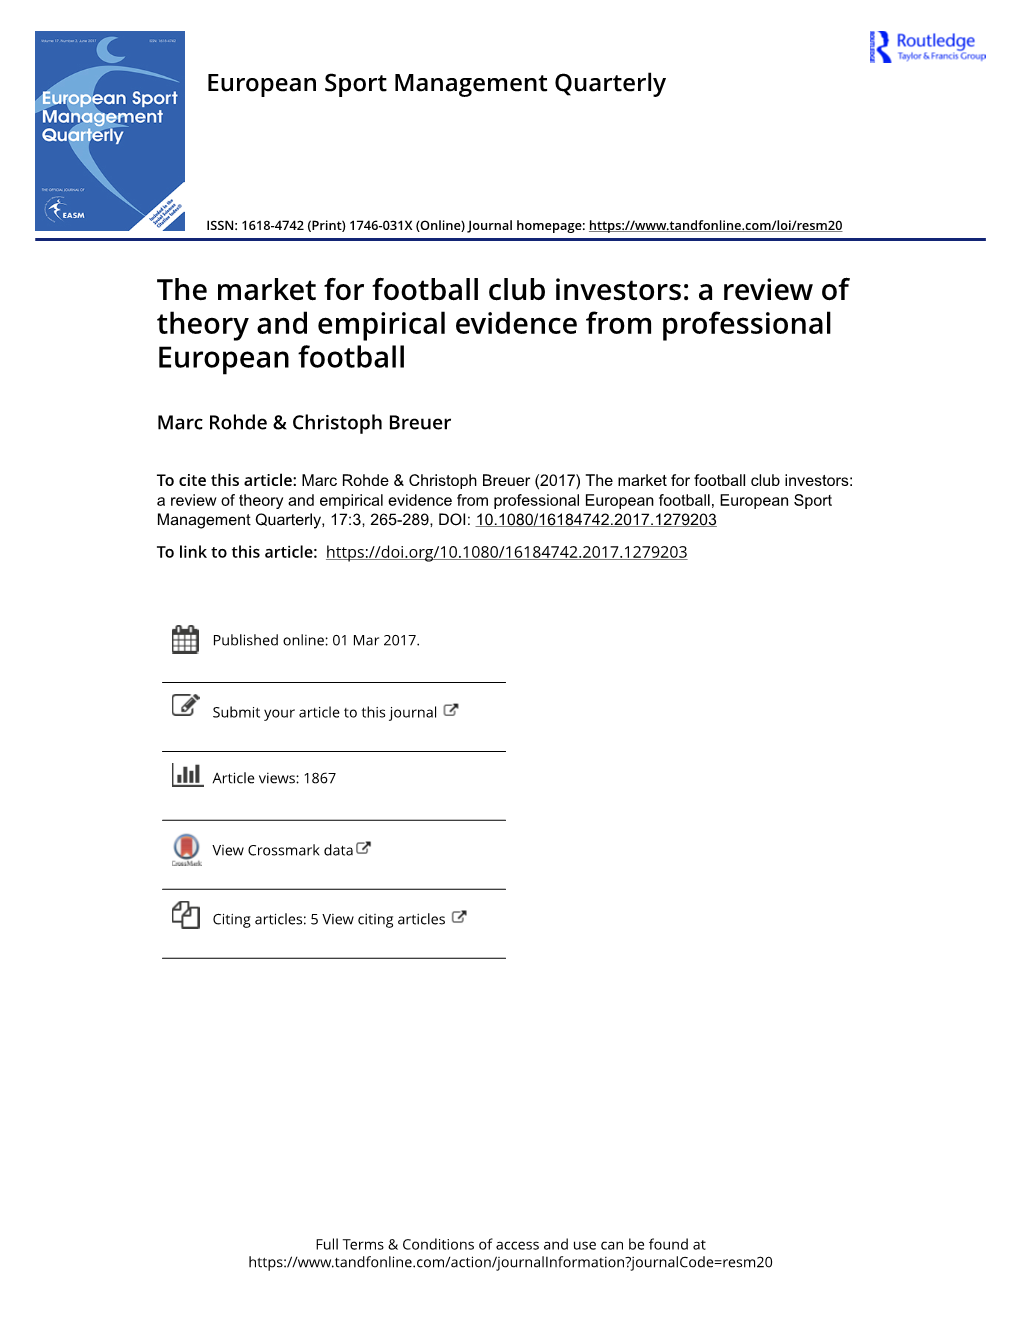 The Market for Football Club Investors: a Review of Theory and Empirical Evidence from Professional European Football